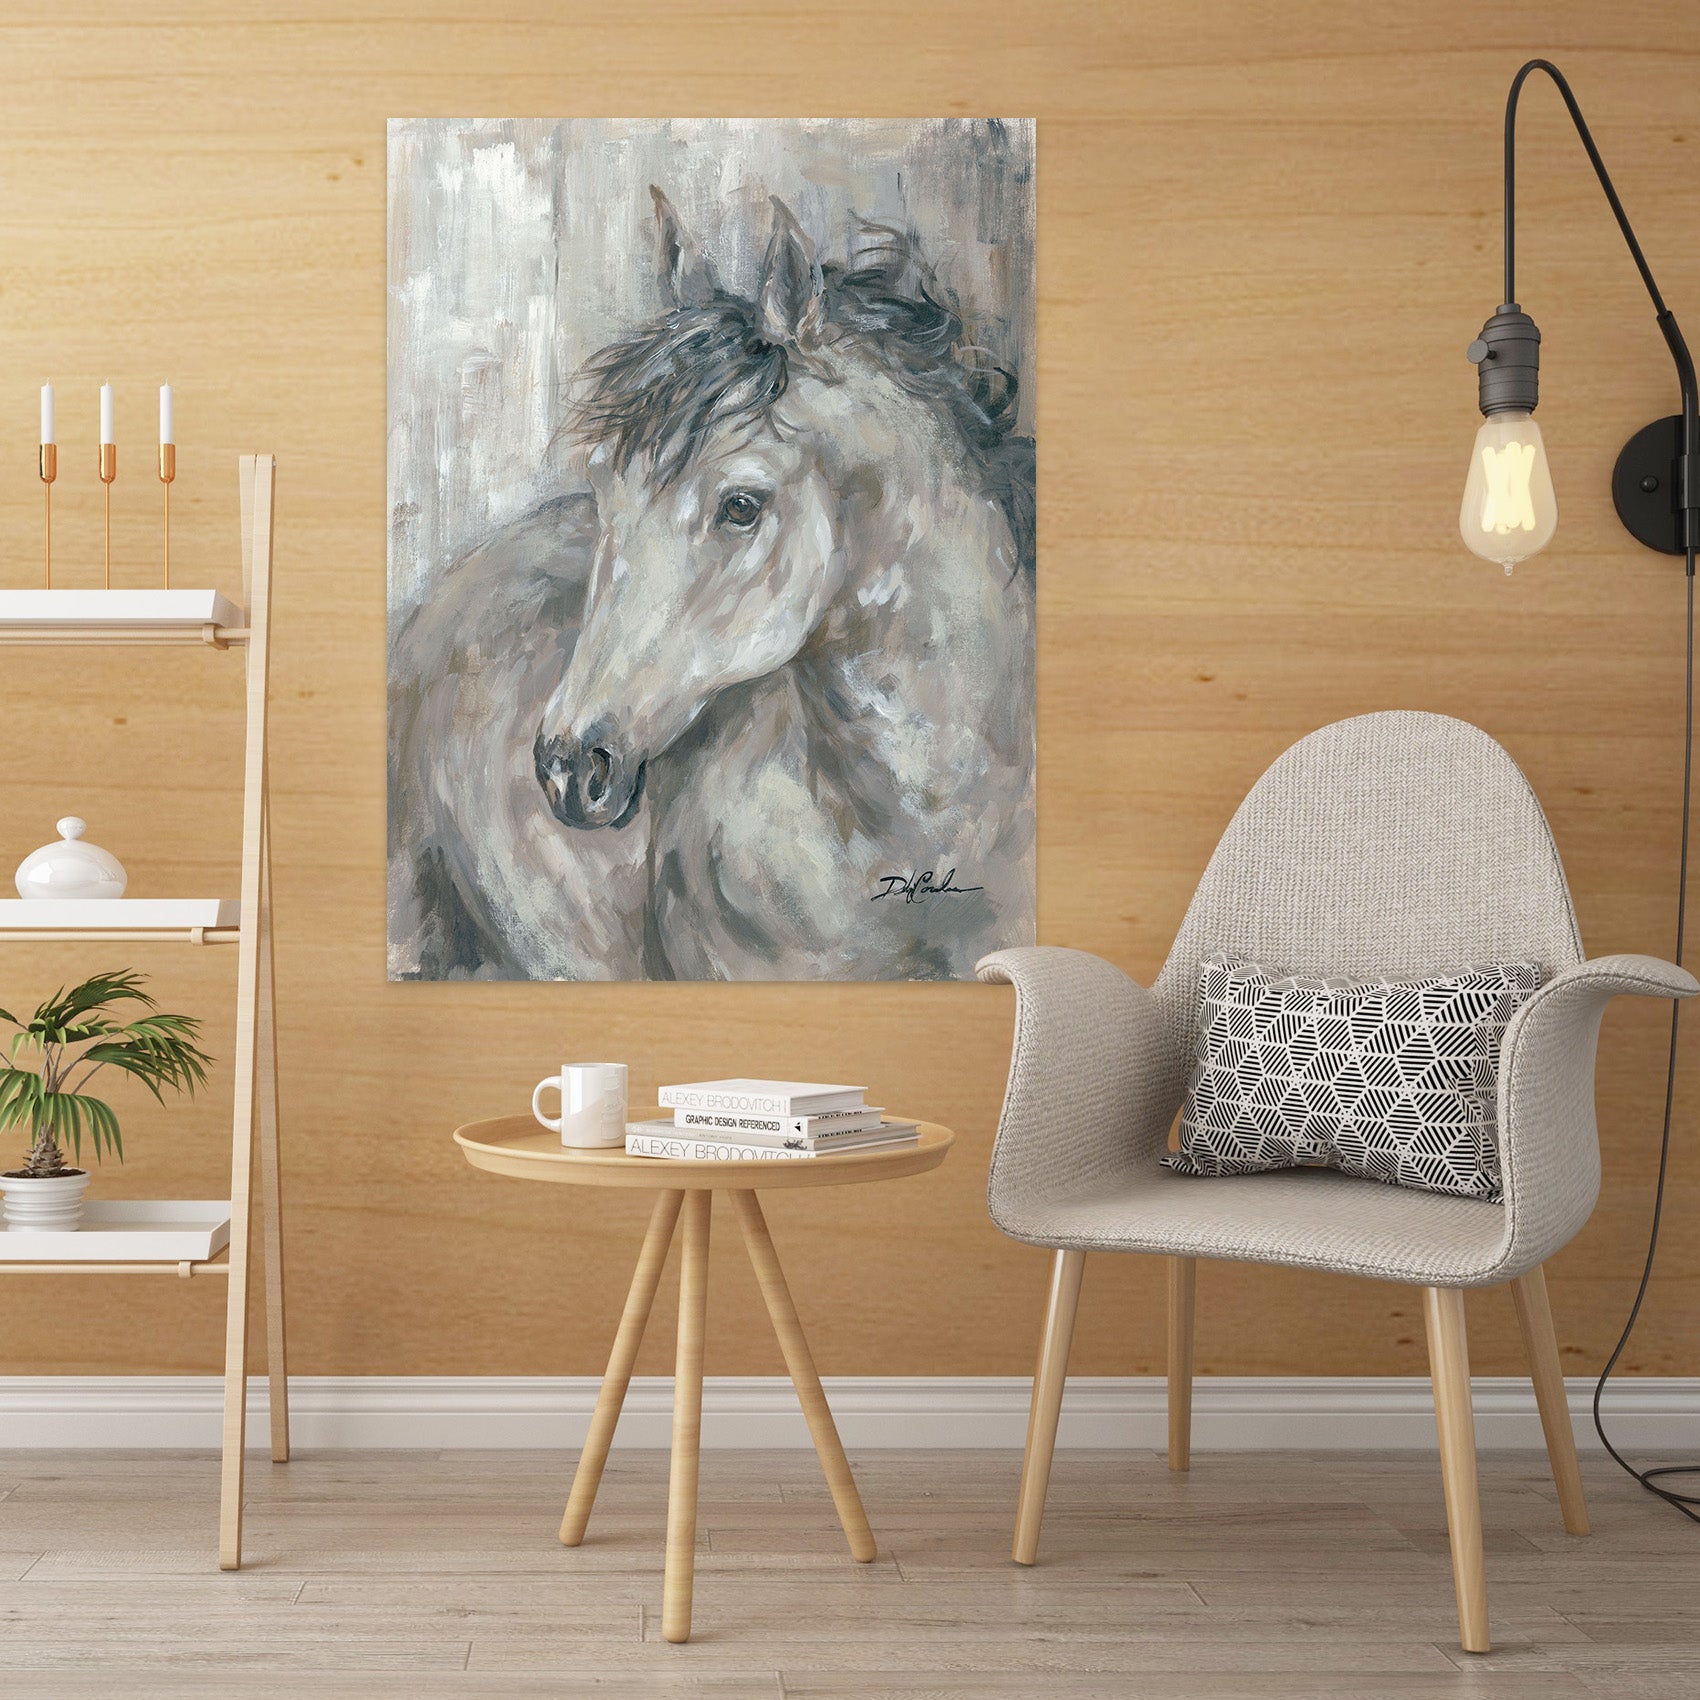 3D Horse Painting 0142 Debi Coules Wall Sticker